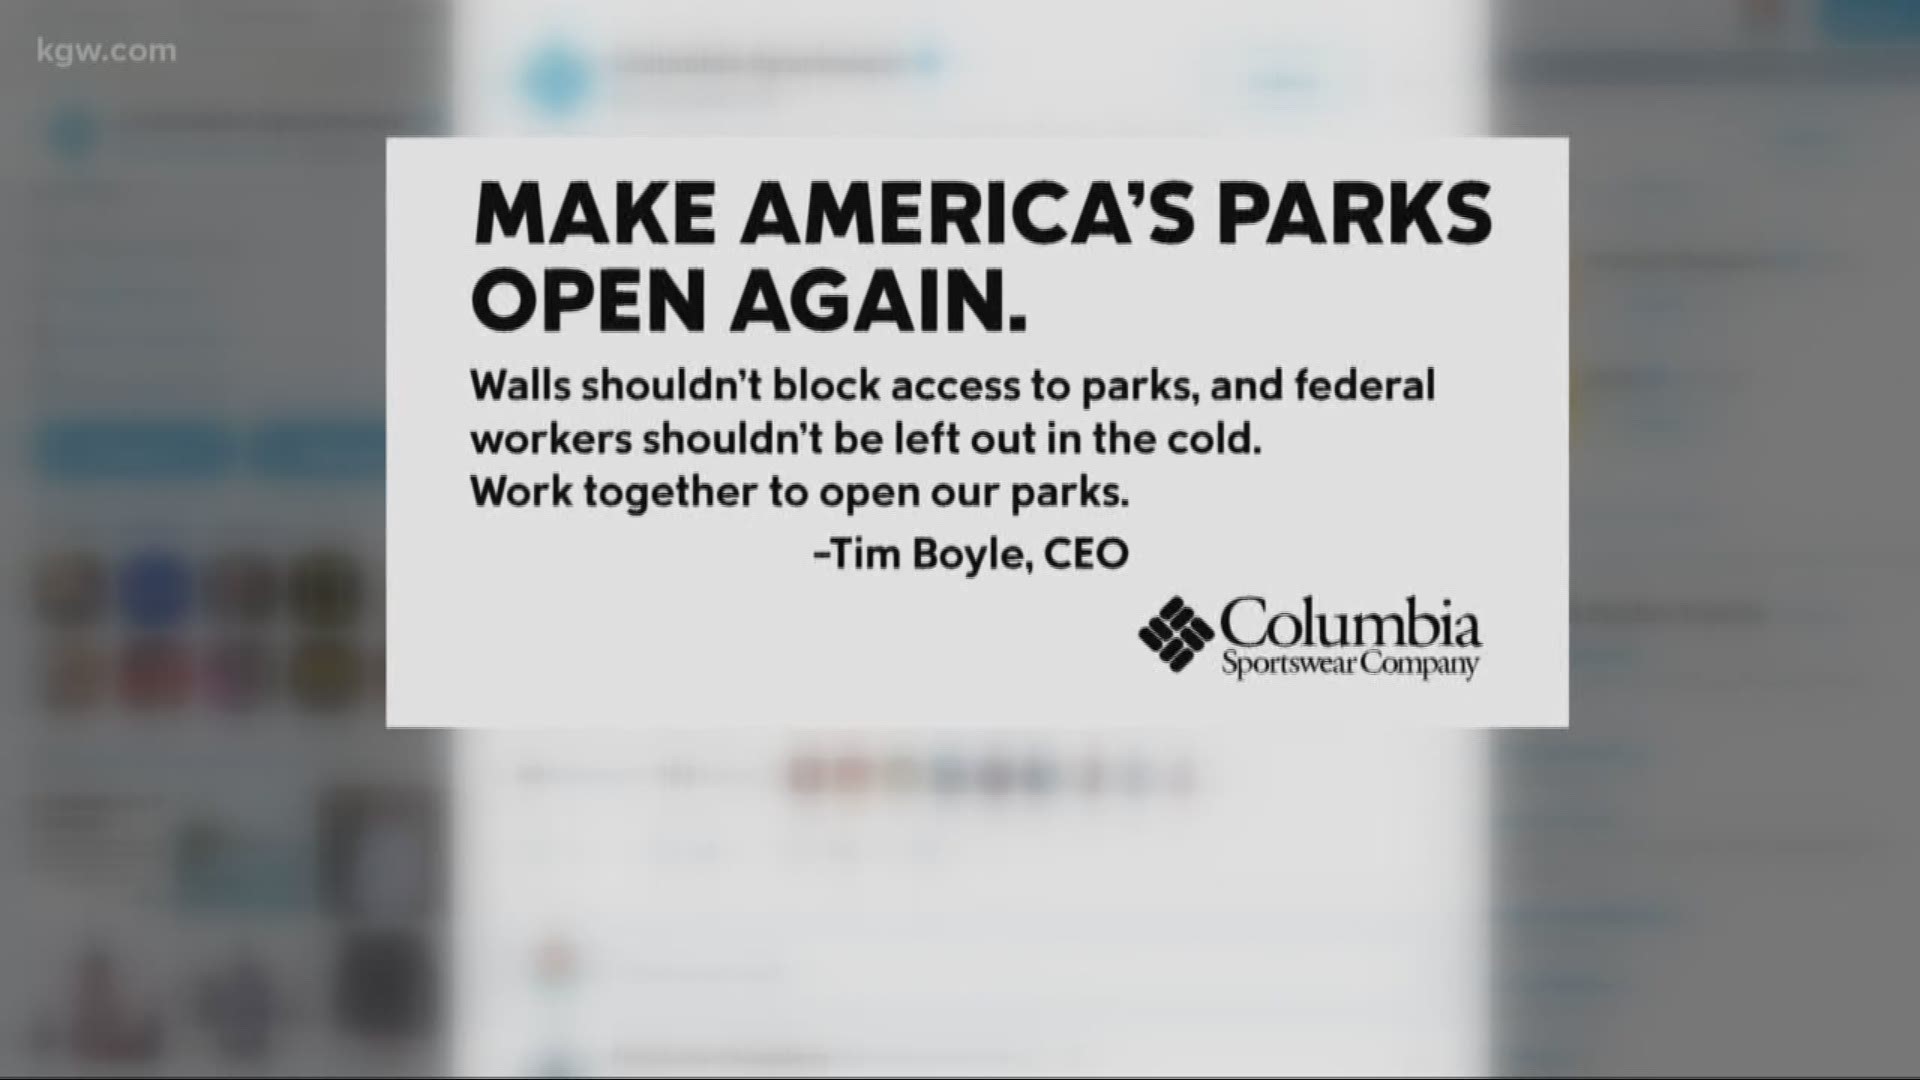 Columbia Sportswear’s CEO says congress should open our national parks.